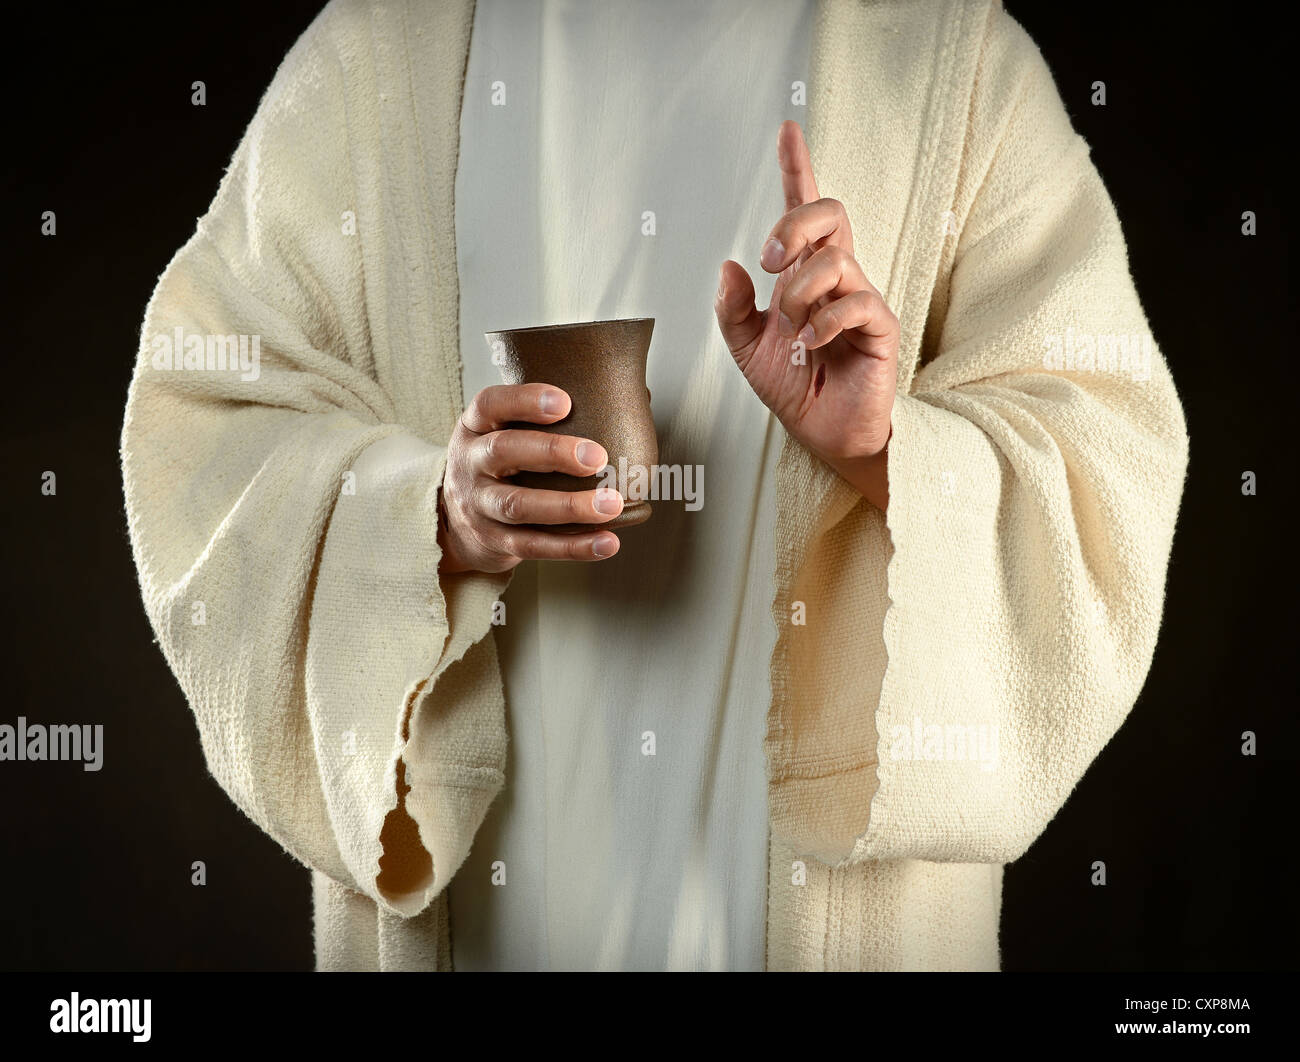 Jesus hands holding cup of wine isolated over dark background Stock Photo